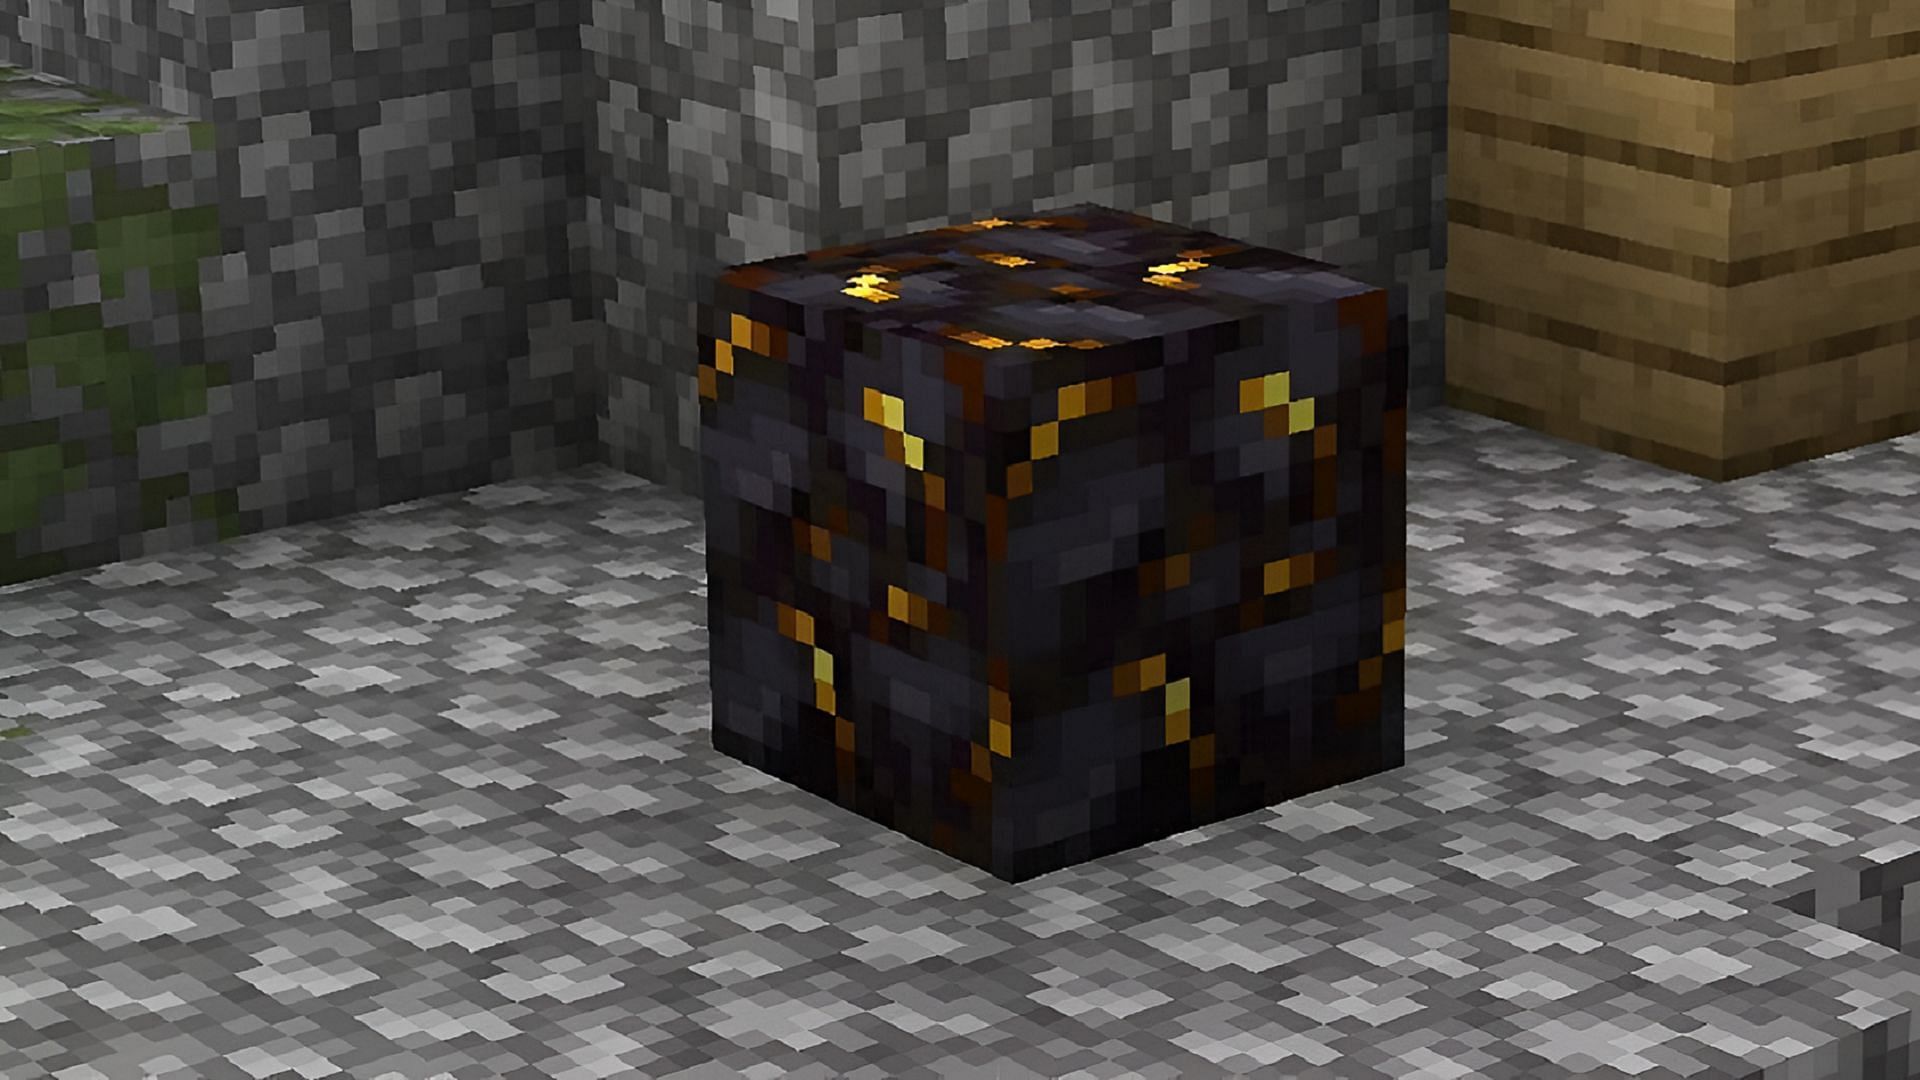 Gilded blackstone blocks can provide access to gold in Minecraft (Image via Mojang)